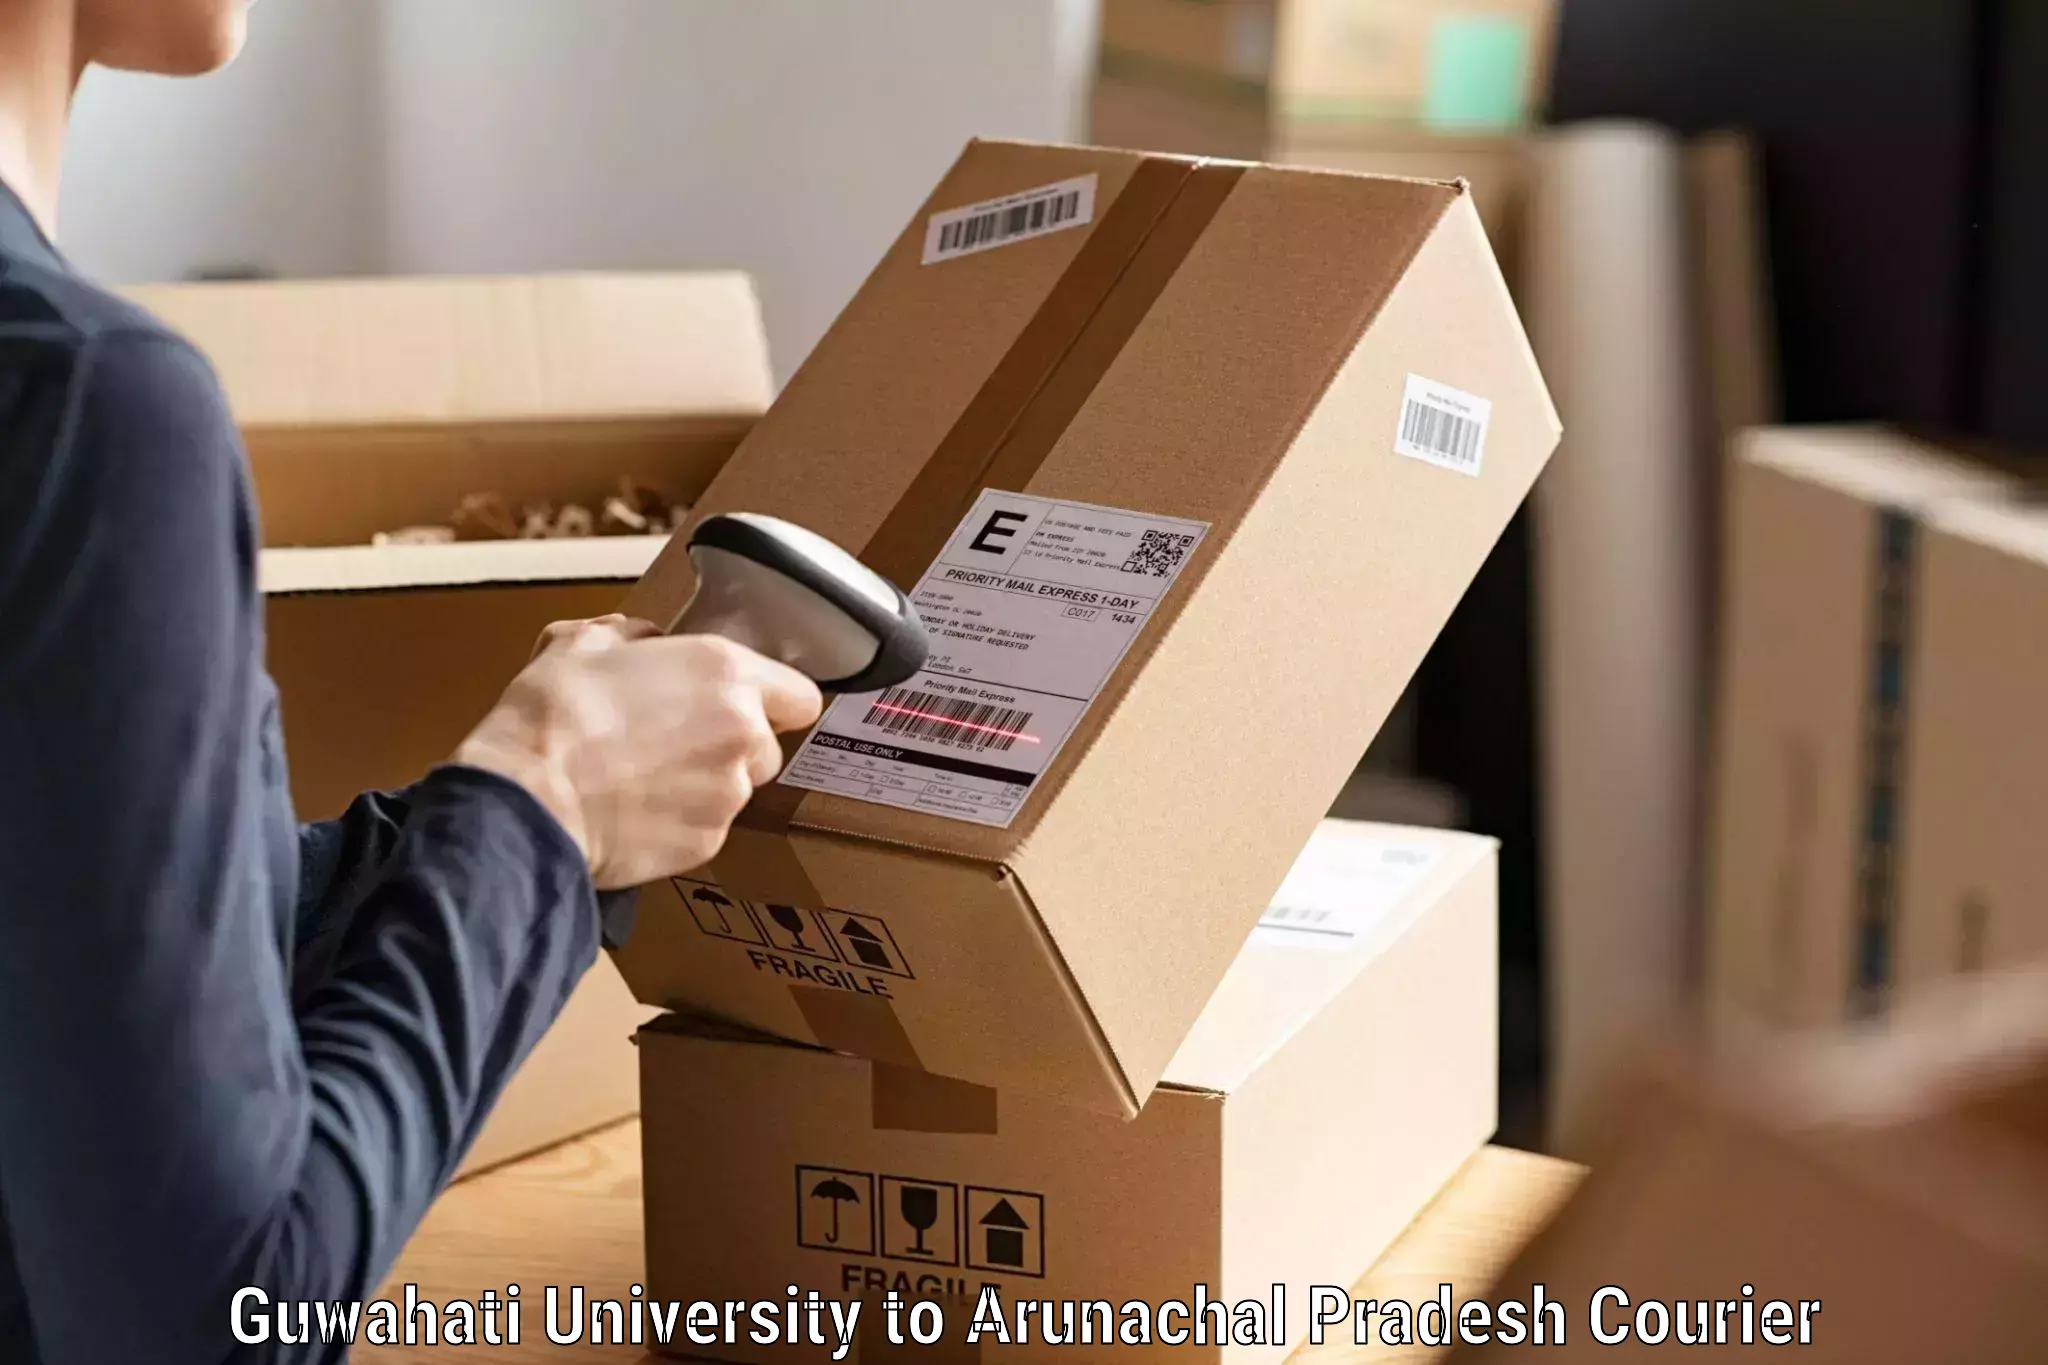 Comprehensive shipping services Guwahati University to Lower Dibang Valley